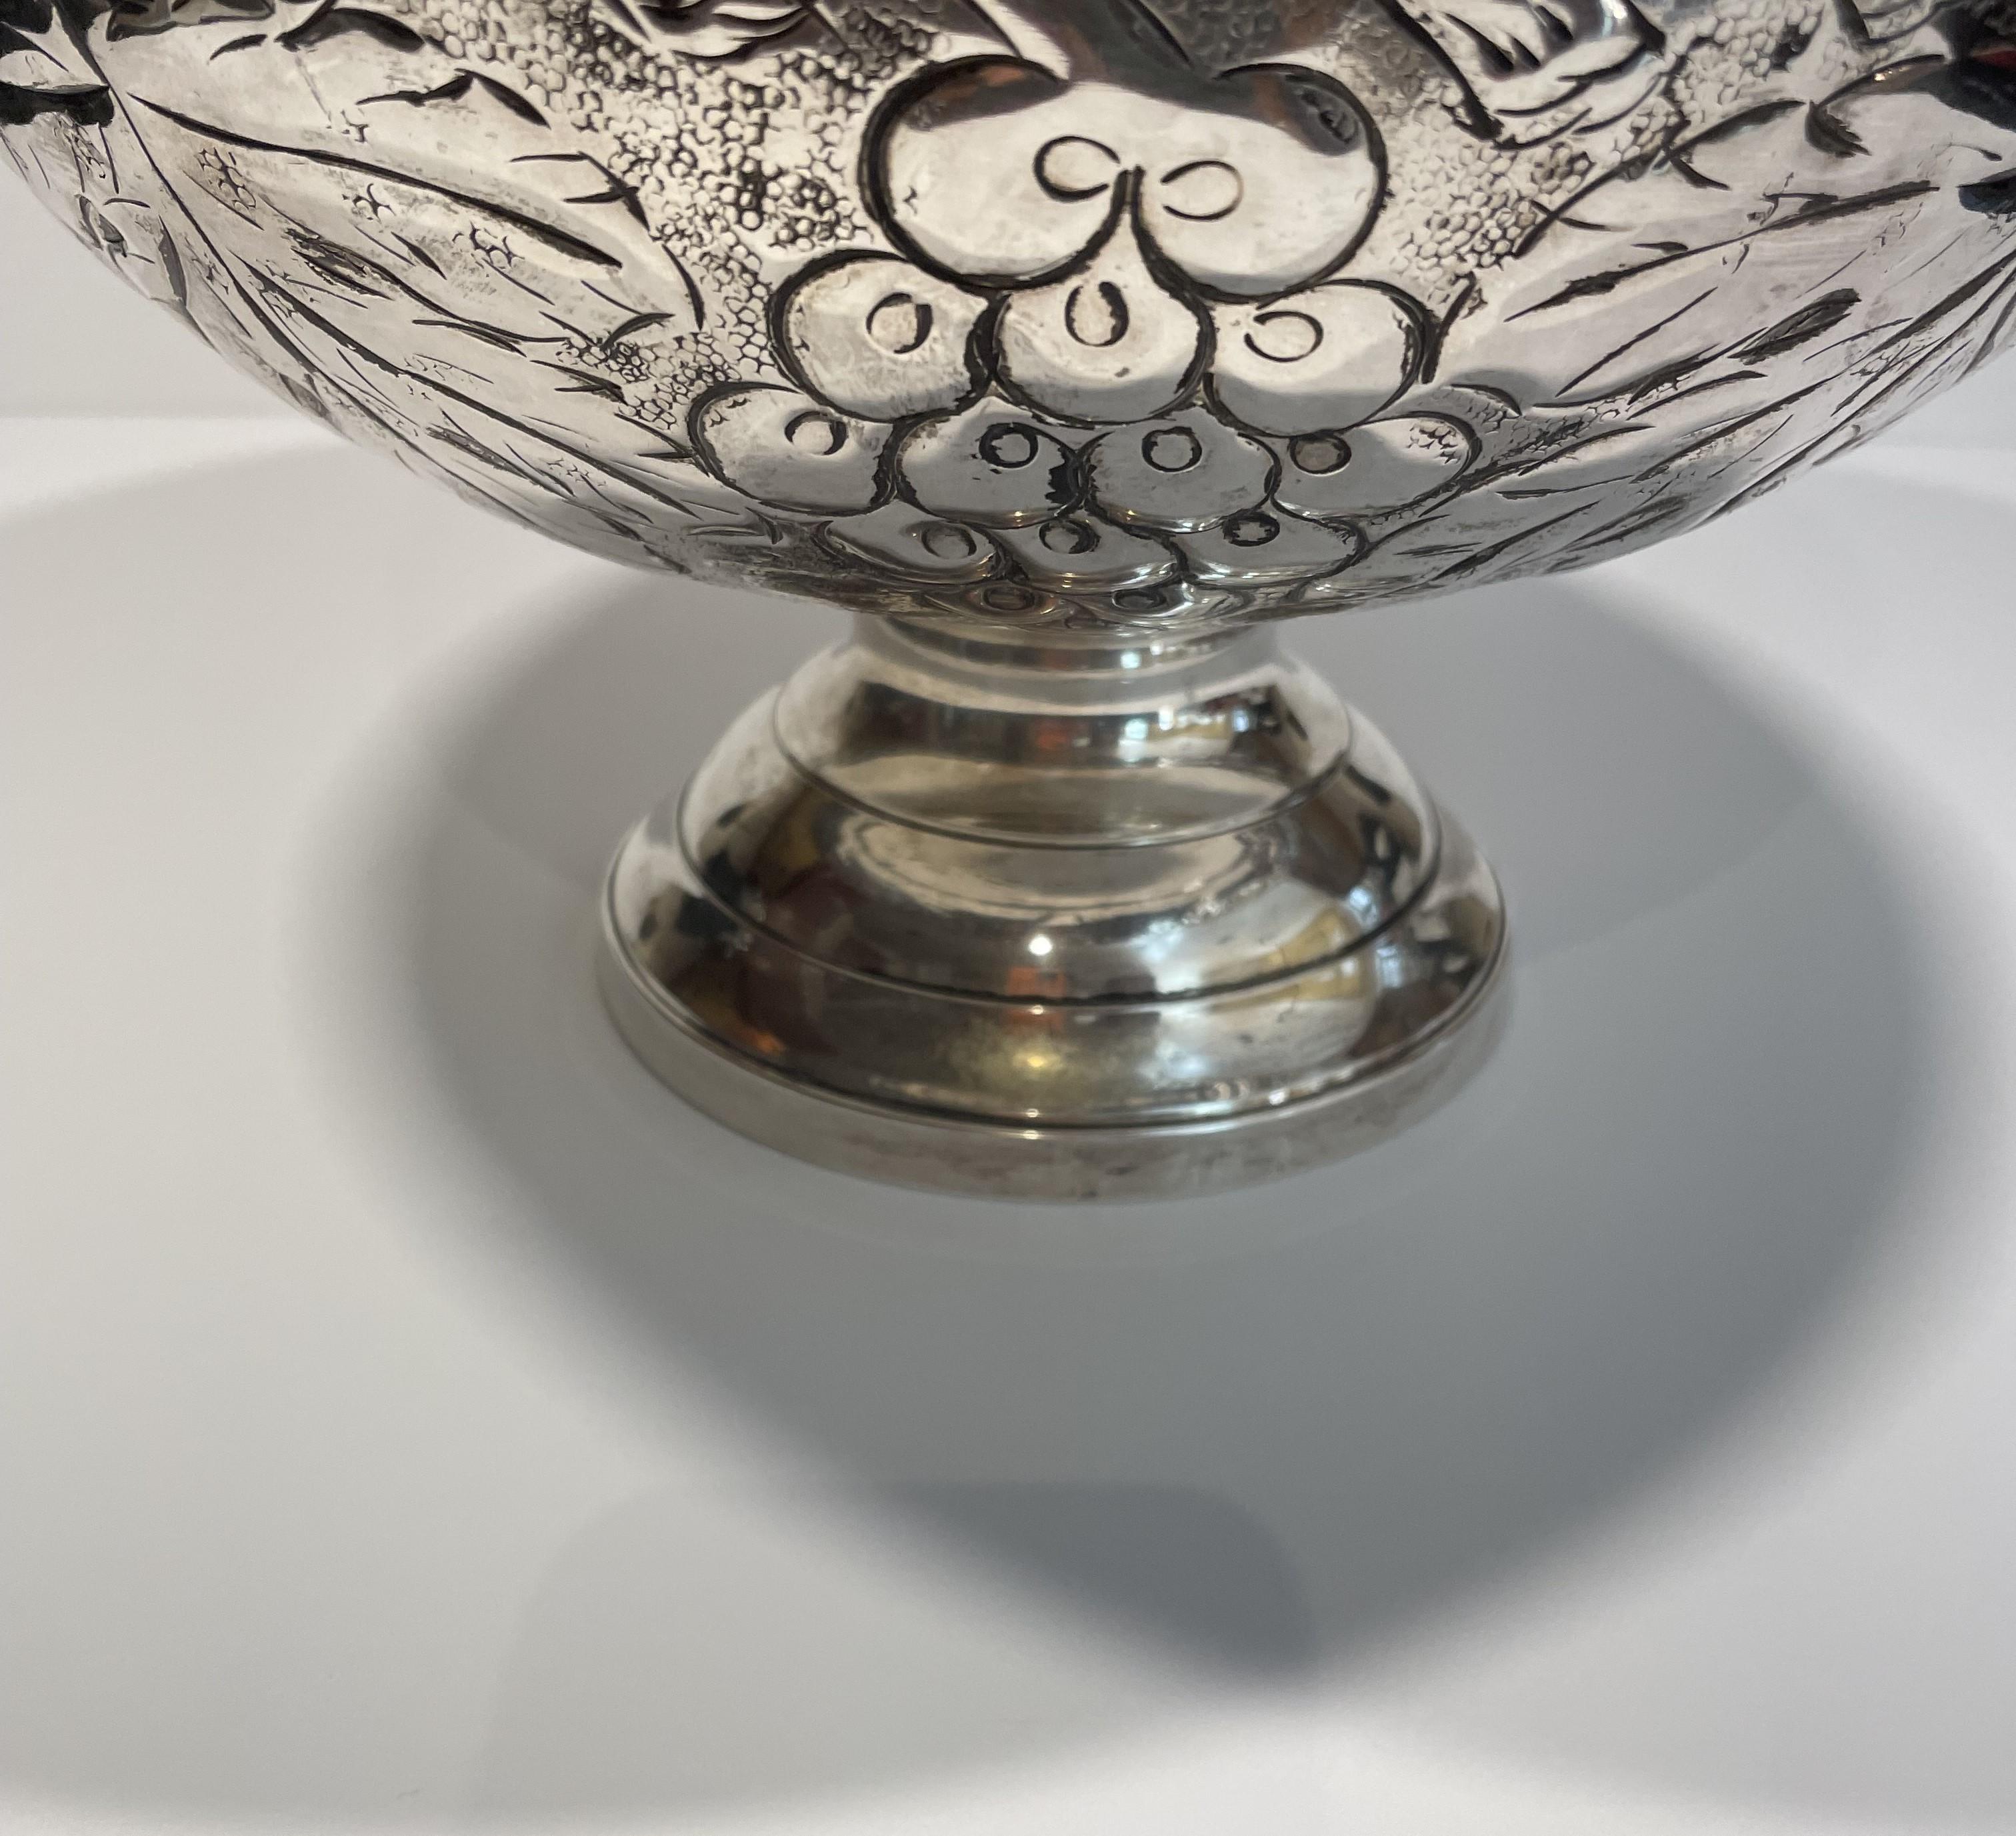 20th Century Large Artisan-Crafted Silver Urns - A Pair For Sale